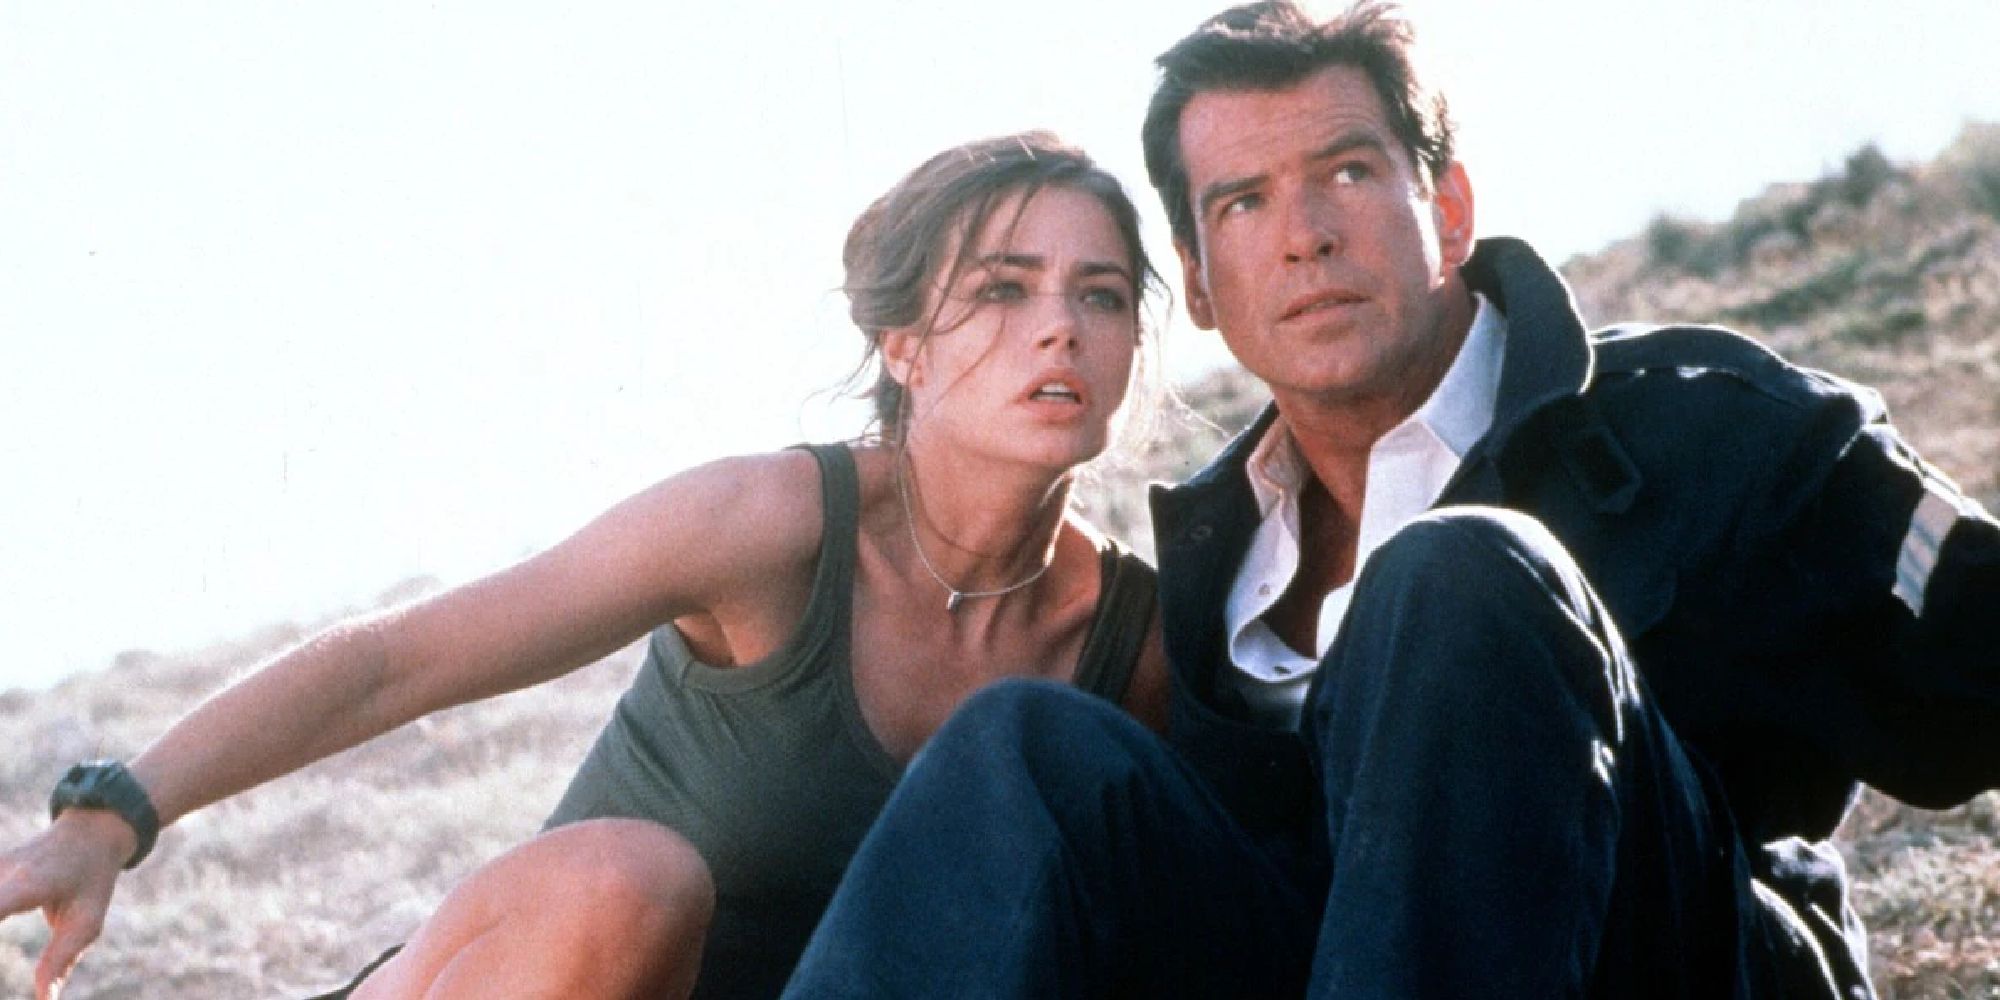 Denise Richards and Pierce Brosnan as Christmas Jones and James Bond looking in the same direction in The World is Not Enough